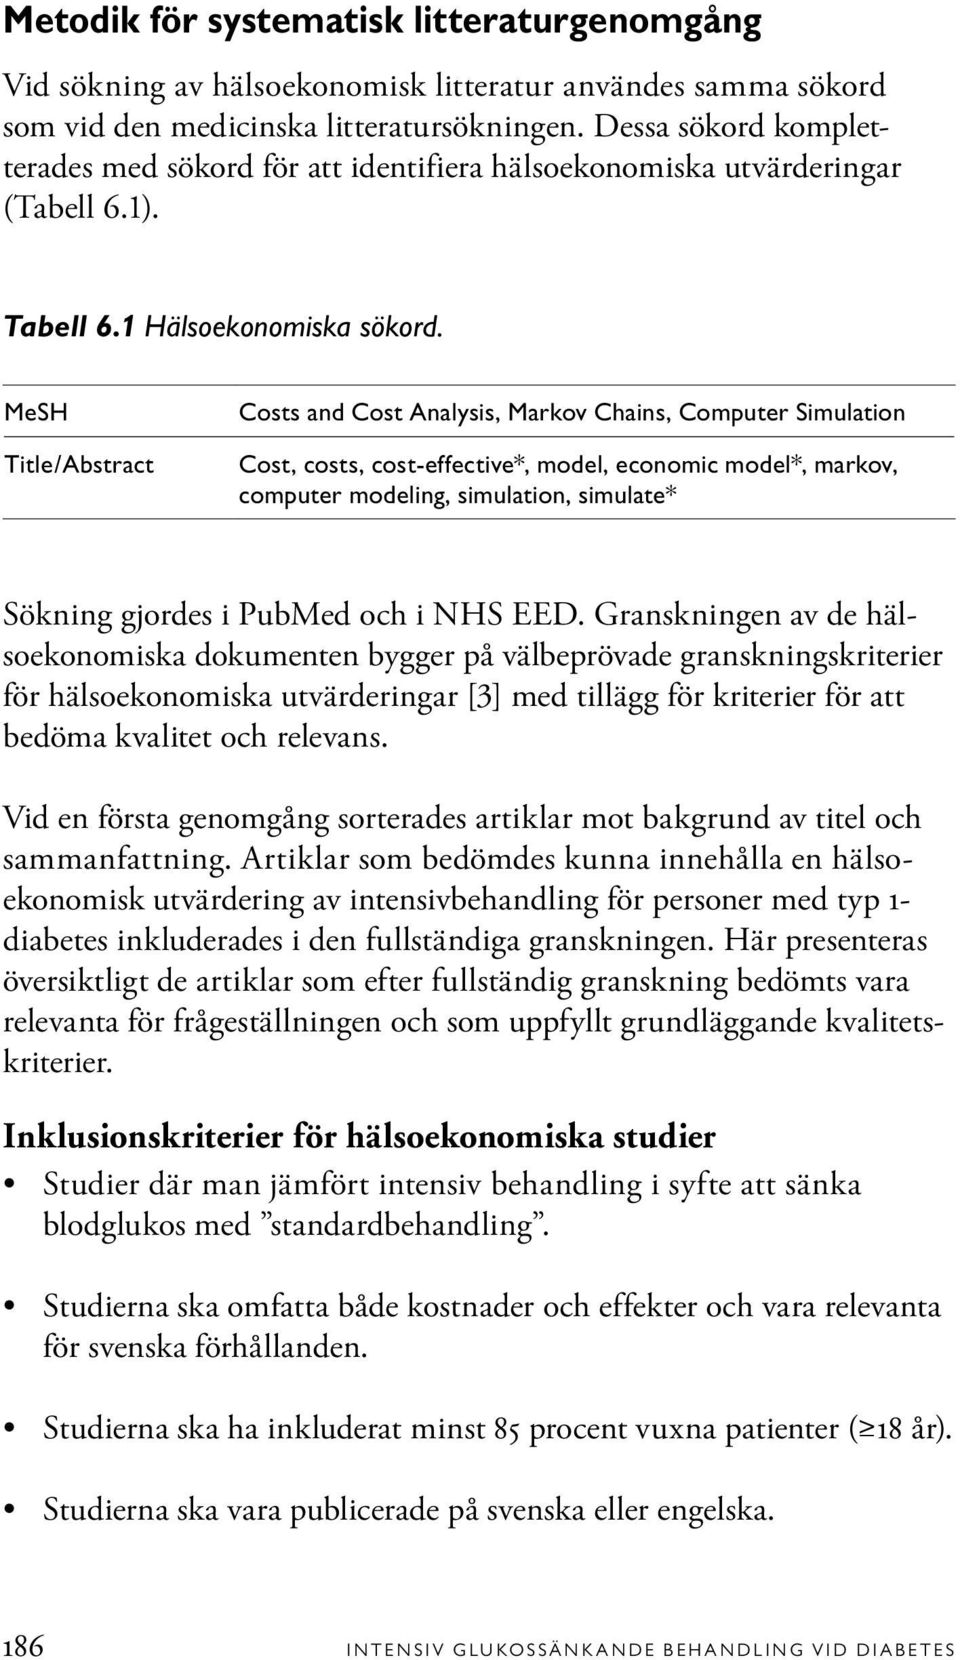 MeSH Title/Abstract Costs and Cost Analysis, Markov Chains, Computer Simulation Cost, costs, cost-effective*, model, economic model*, markov, computer modeling, simulation, simulate* Sökning gjordes